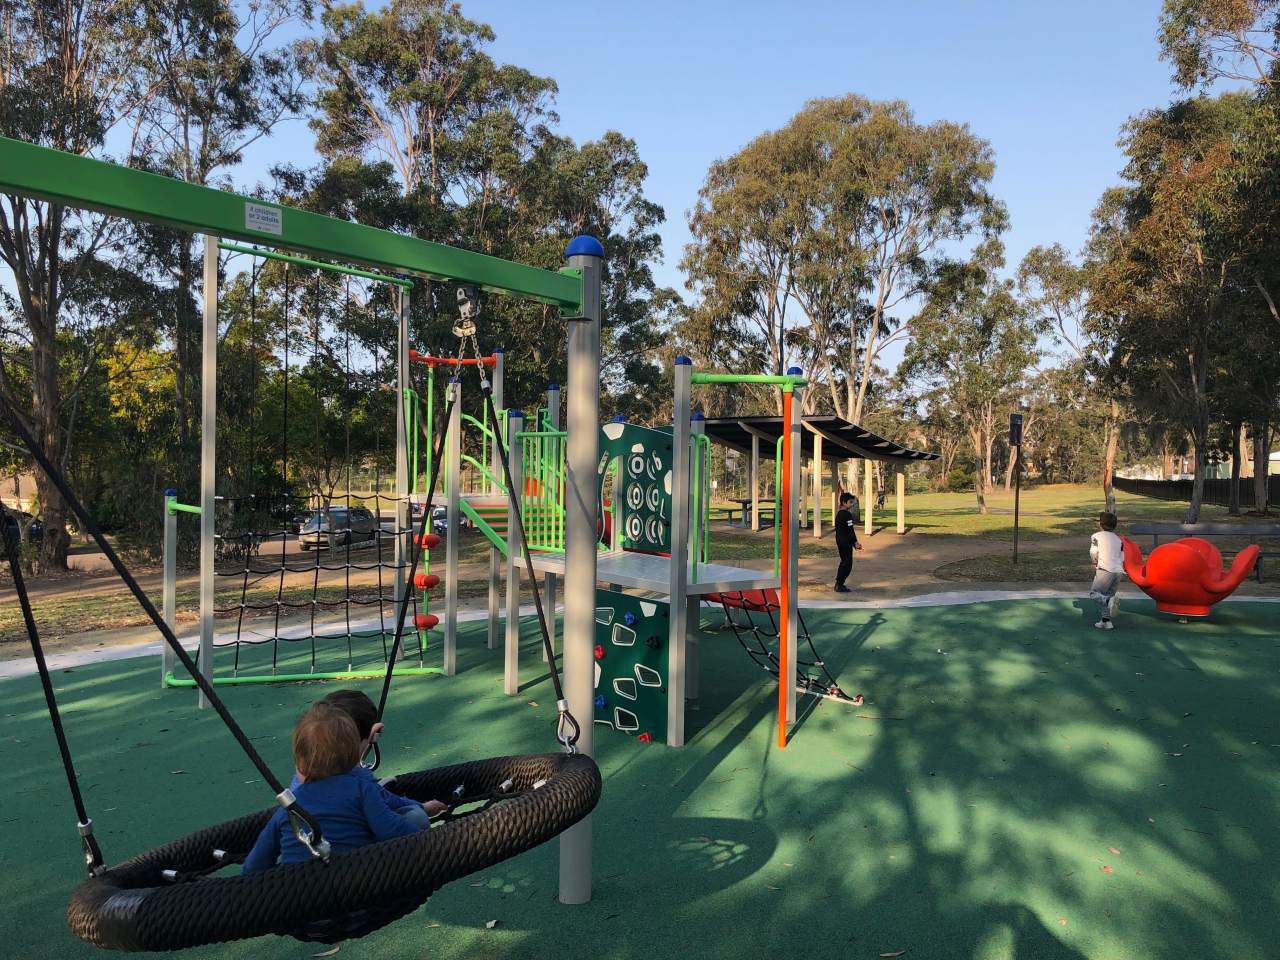 Little Ones Can Get Used to Their Wheels on the Bike Path at Skyhawk Reserve Playground, Hamlyn Terrace